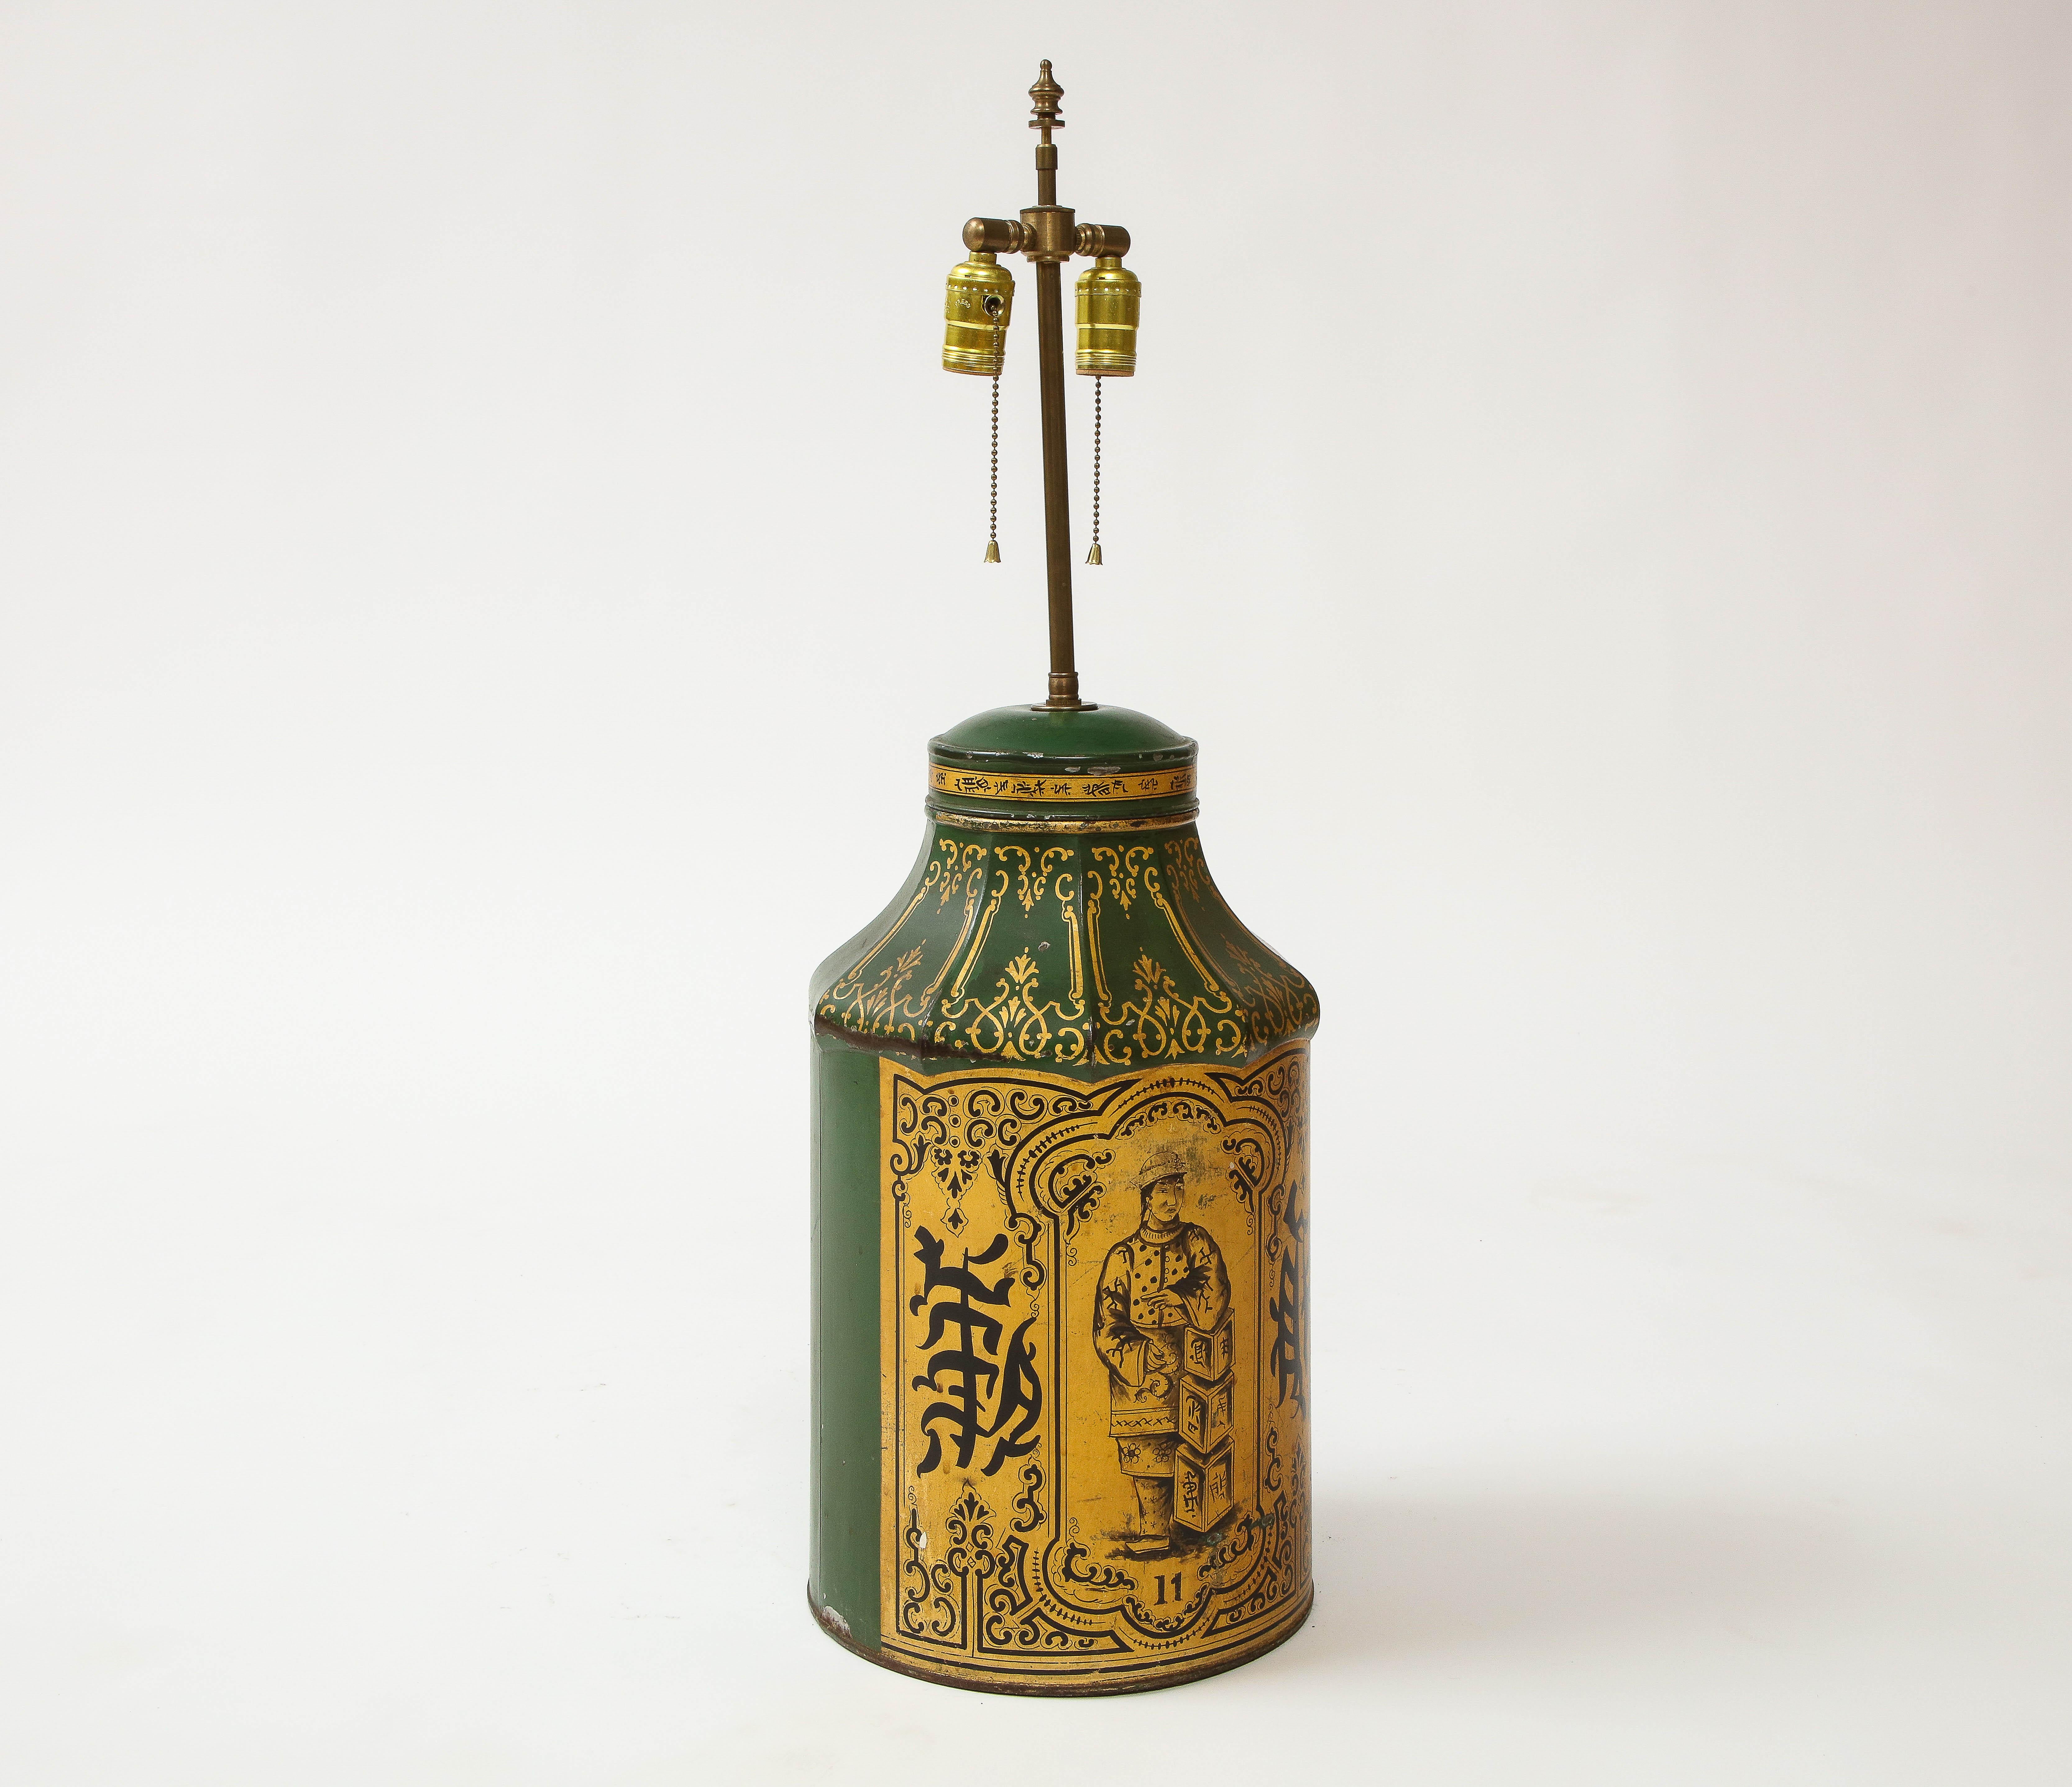 Of cylindrical form with incurved top; elaborately decorated with a central cartouche enclosing a Mandarin figure leaning against tea chests set above the number 11, flanked by pseudo-Chinese characters. Later mounted as a lamp with brass double